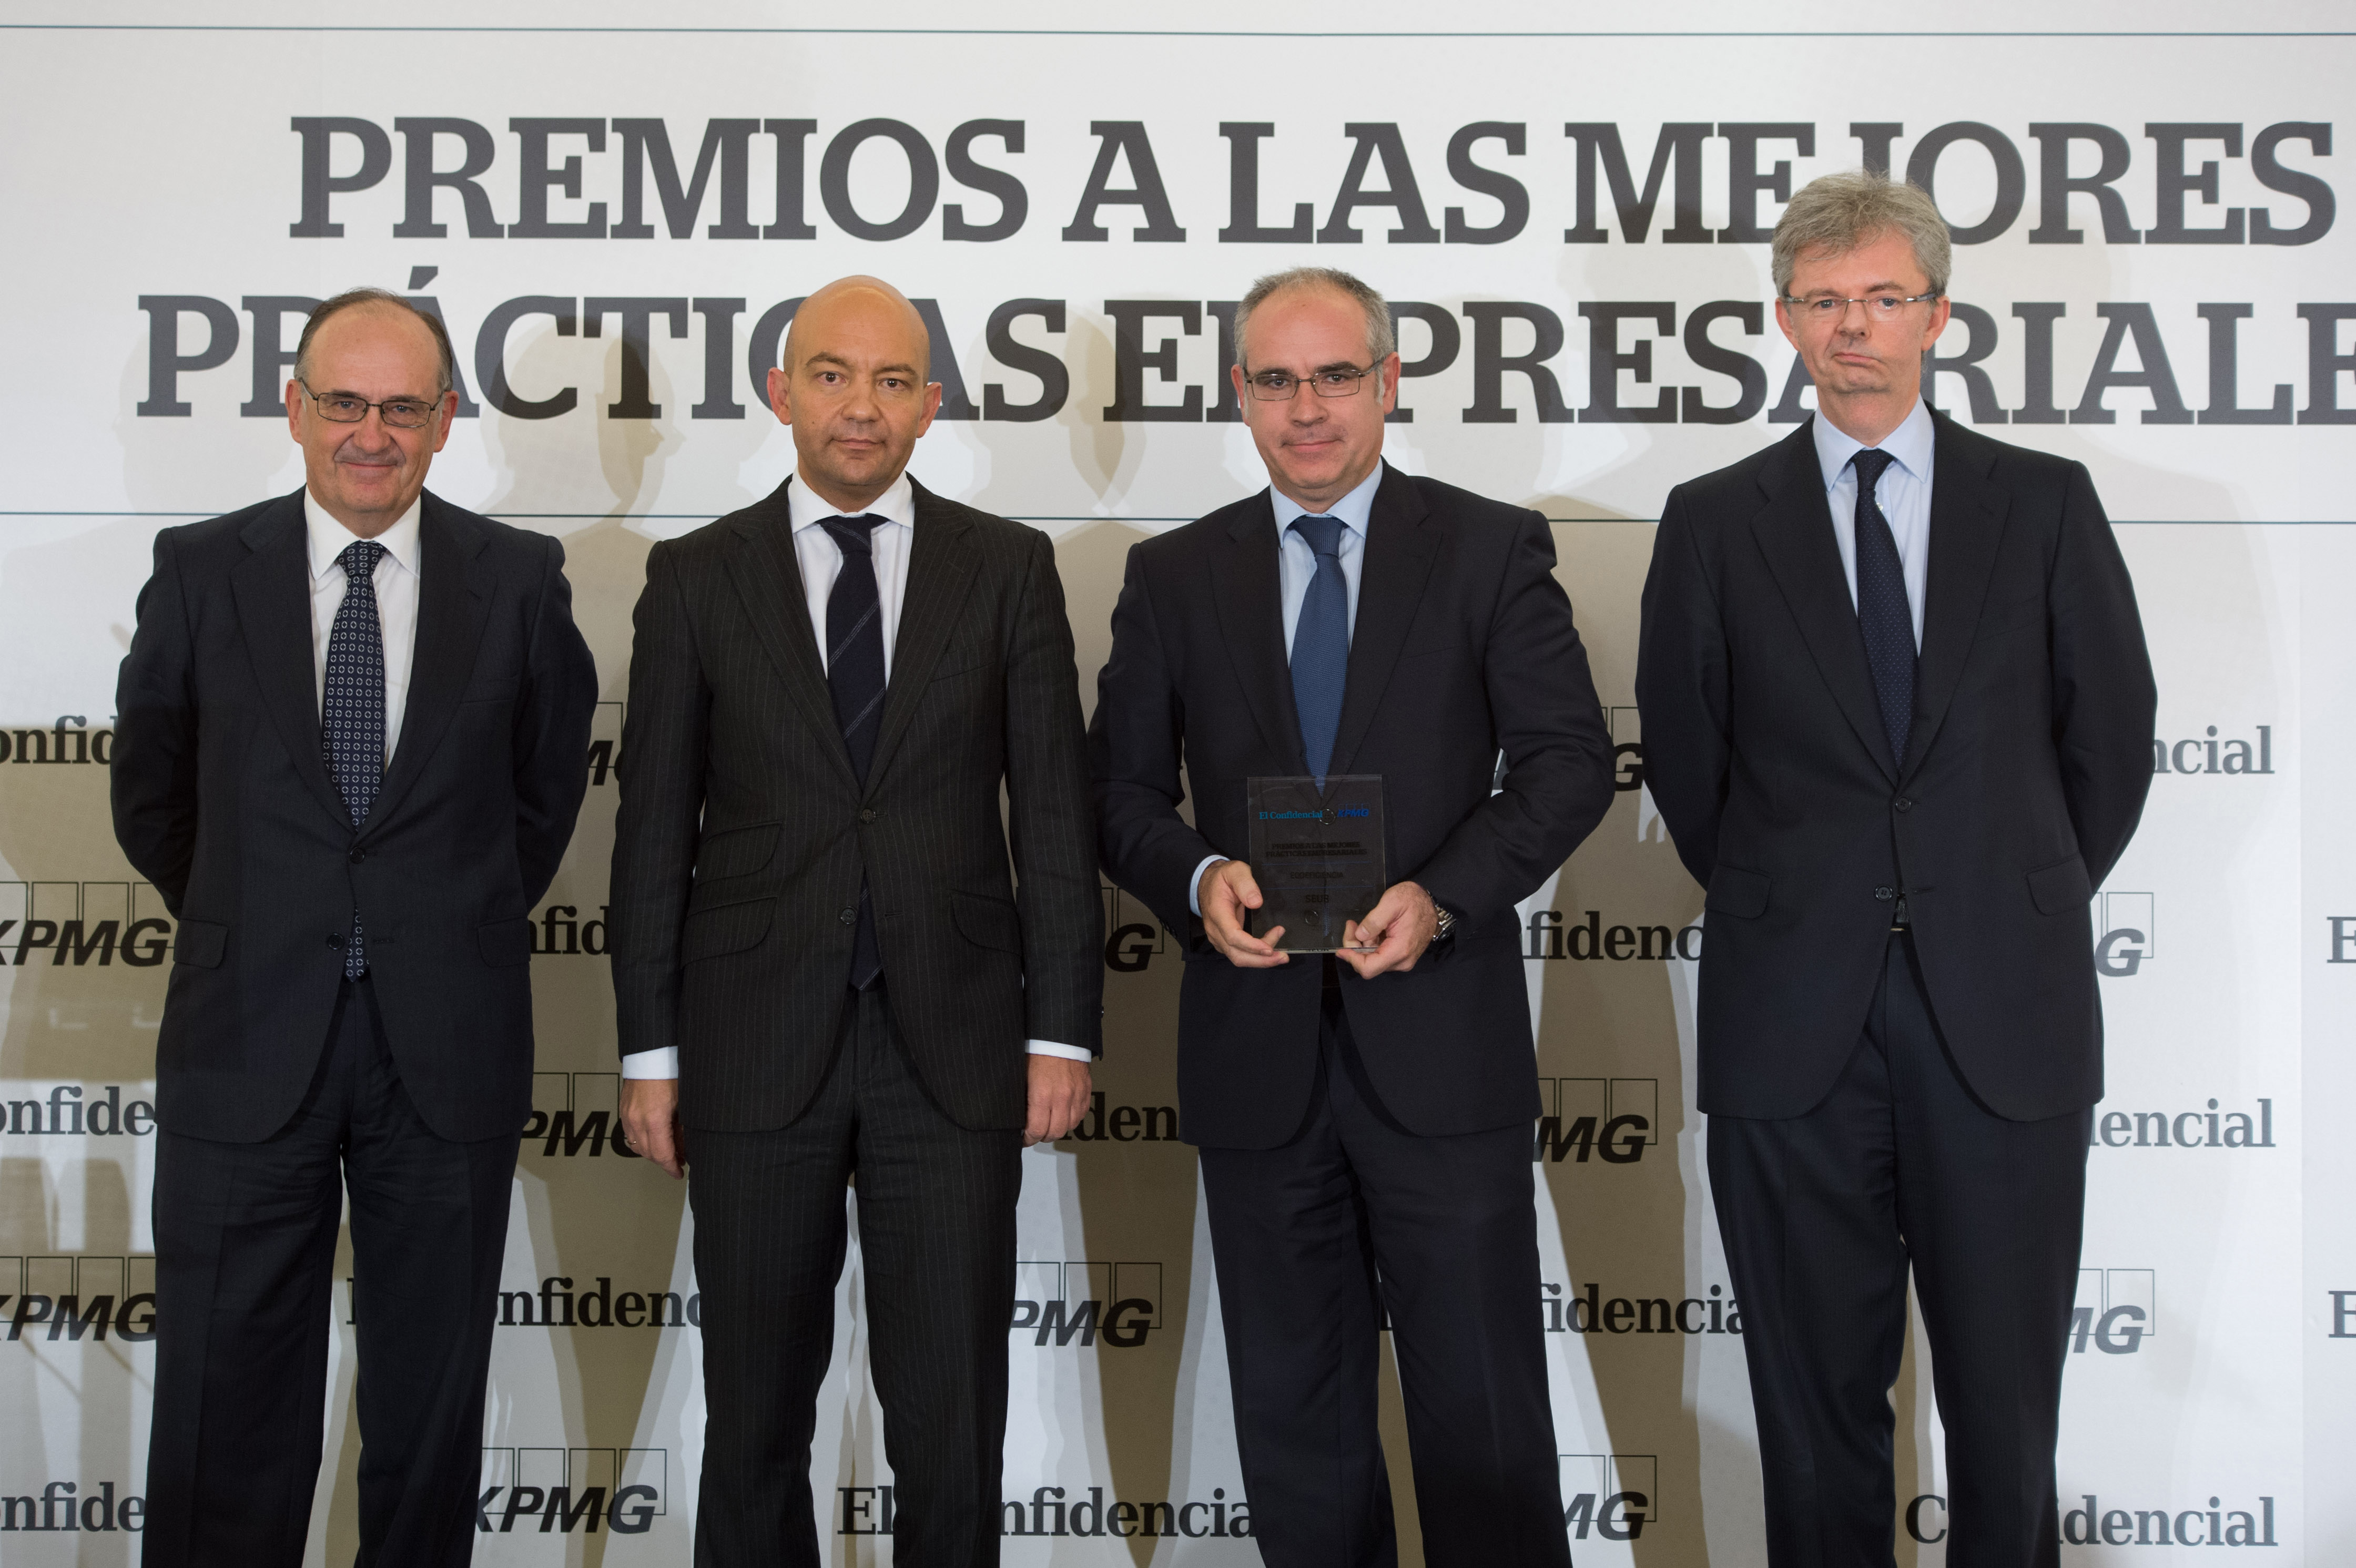 FCC receives KPMG-El Confidencial award for Business Best Practices